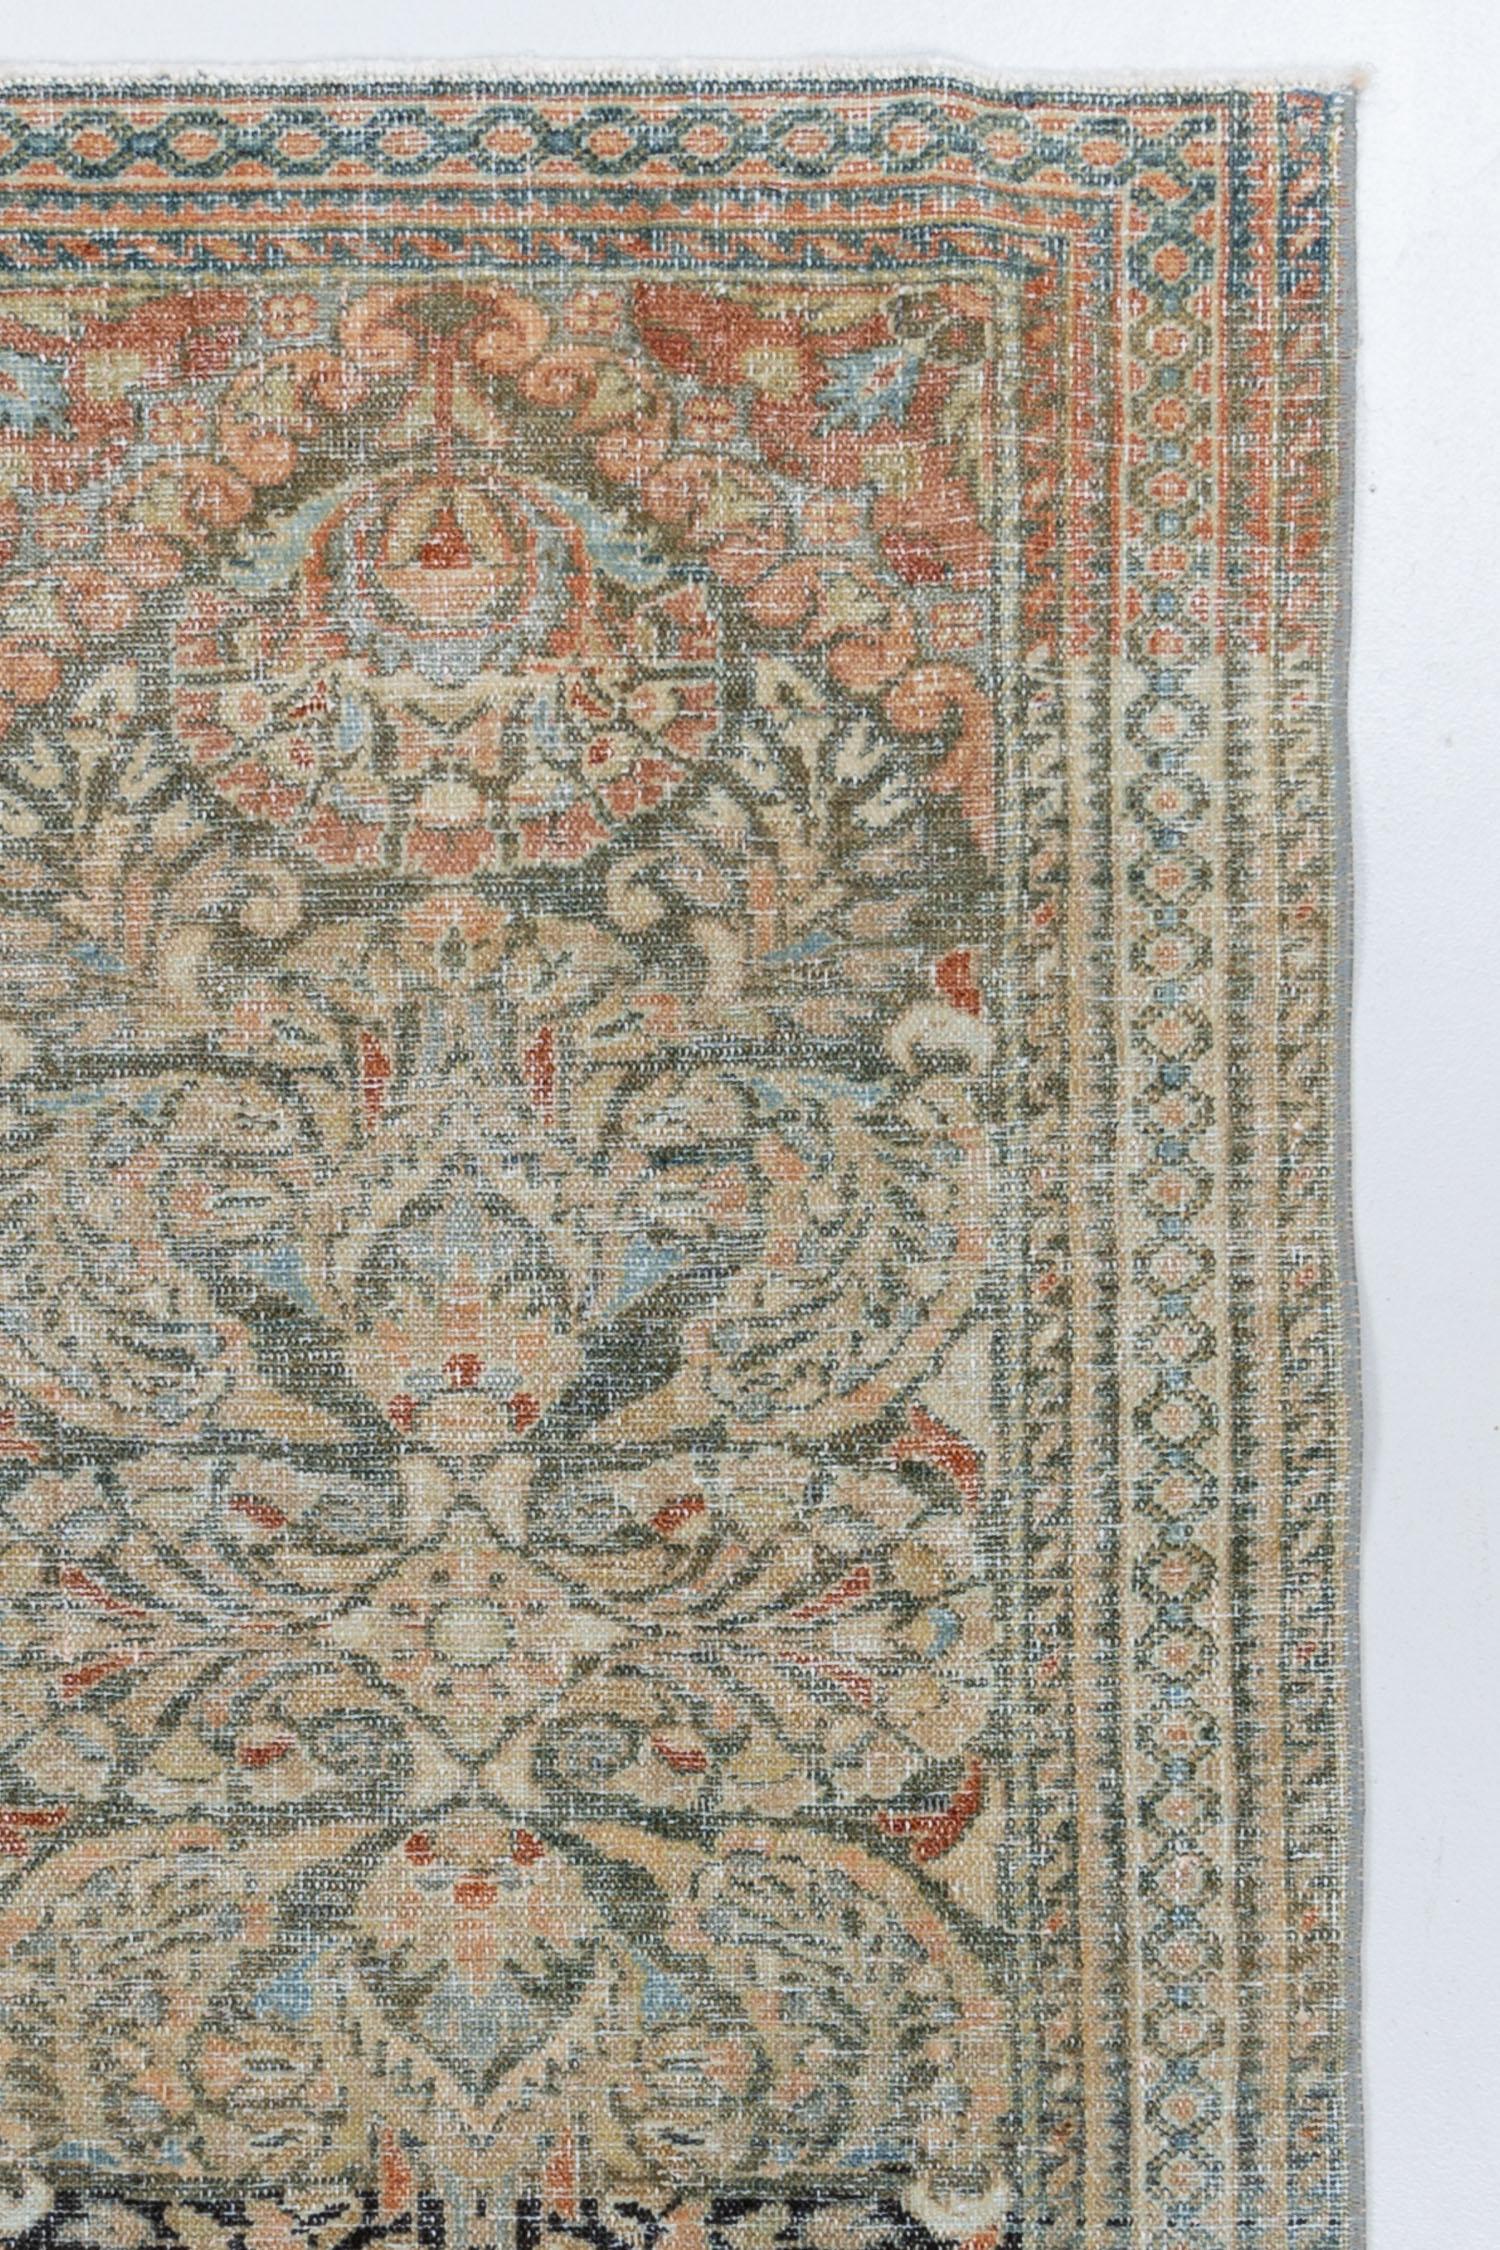 Vintage Persian Lilihan Rug S-31688 In Fair Condition For Sale In West Palm Beach, FL